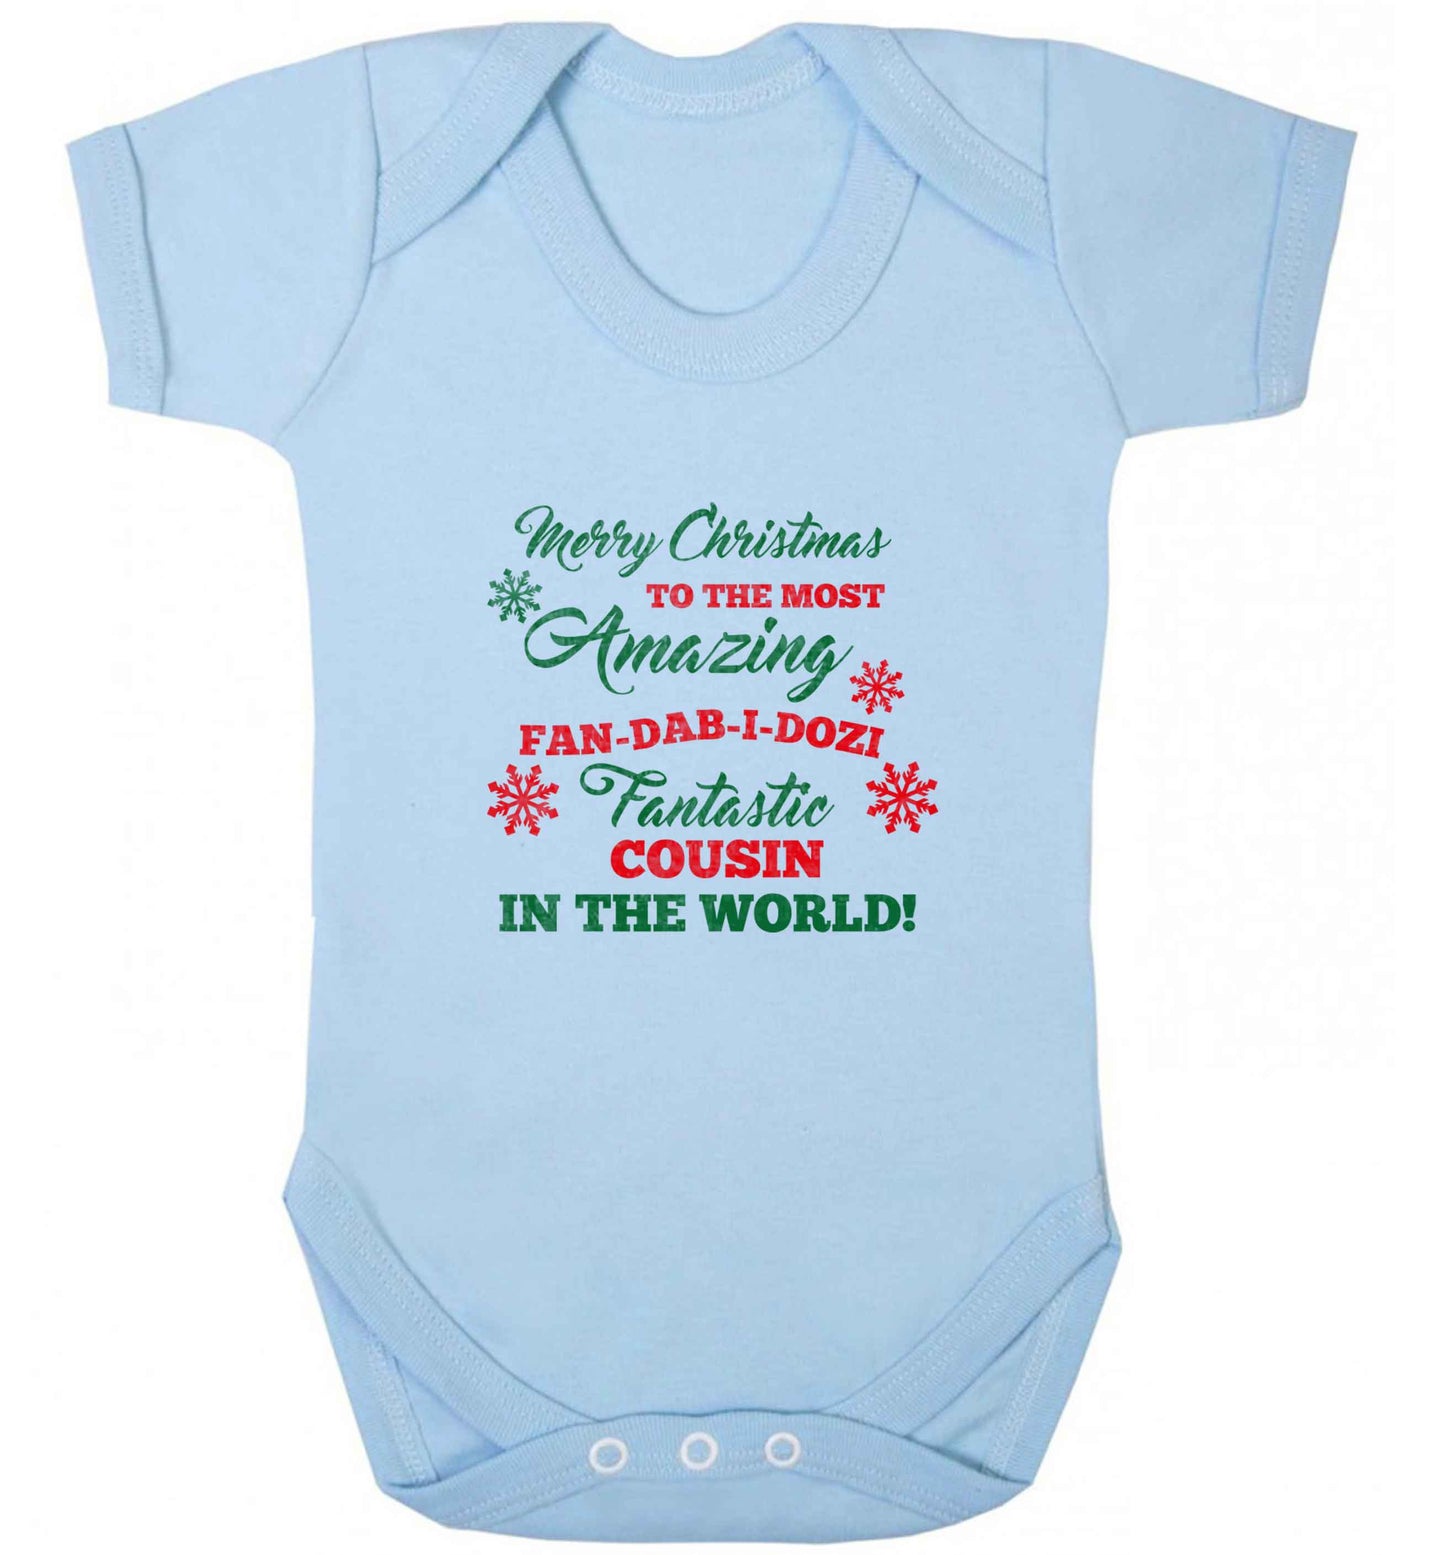 Merry Christmas to the most amazing fan-dab-i-dozi fantasic Cousin in the world baby vest pale blue 18-24 months